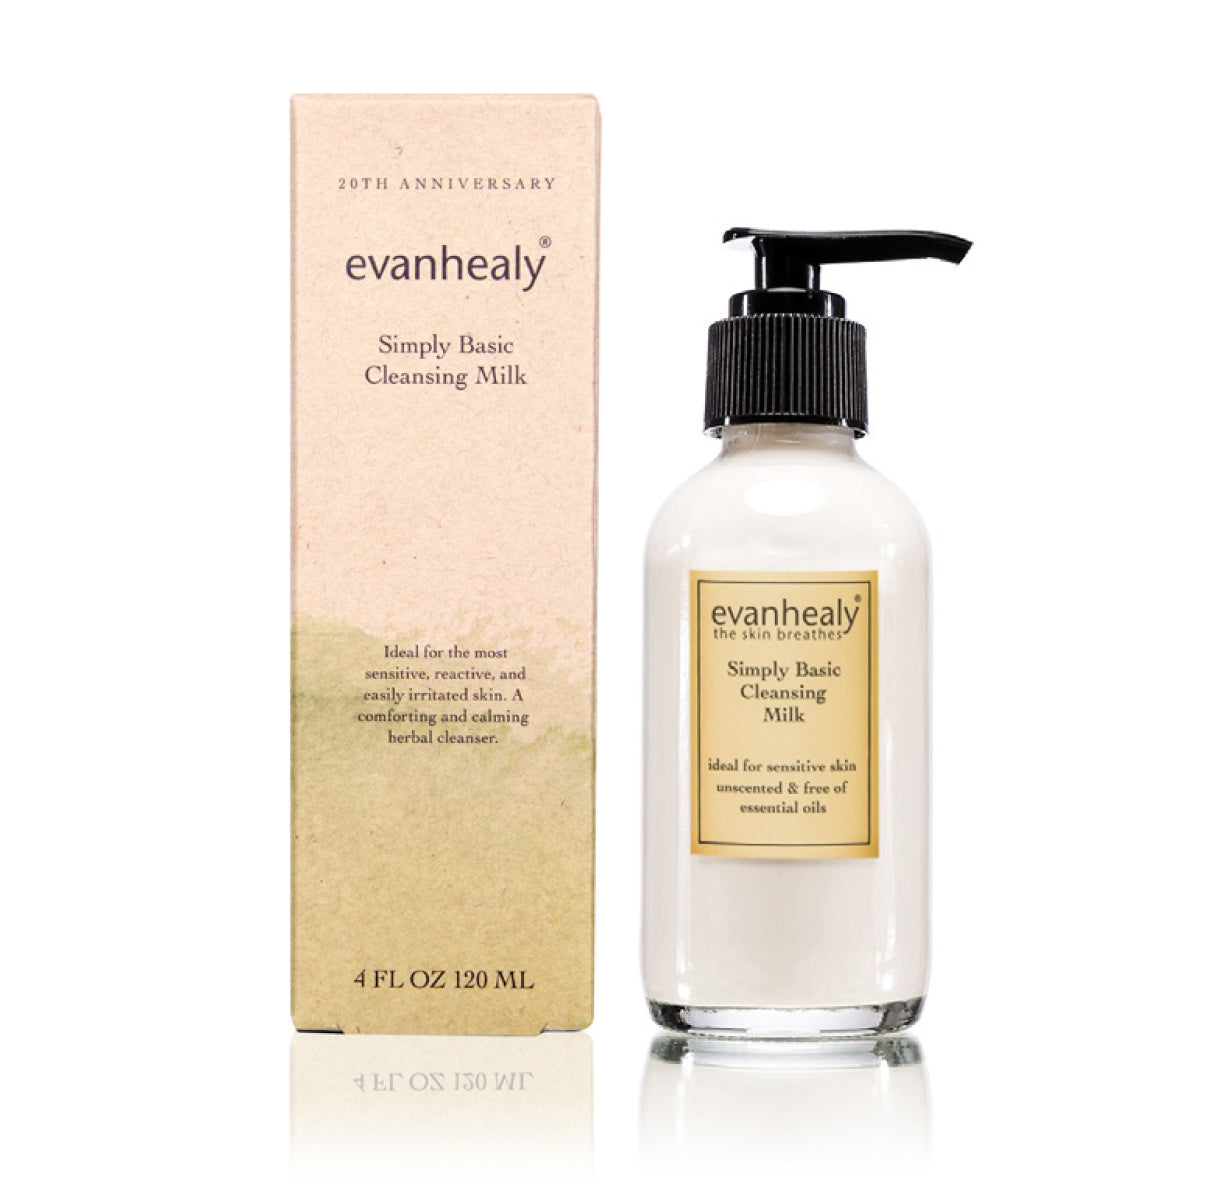 evanhealy simply basic cleansing milk facial cleanser with box